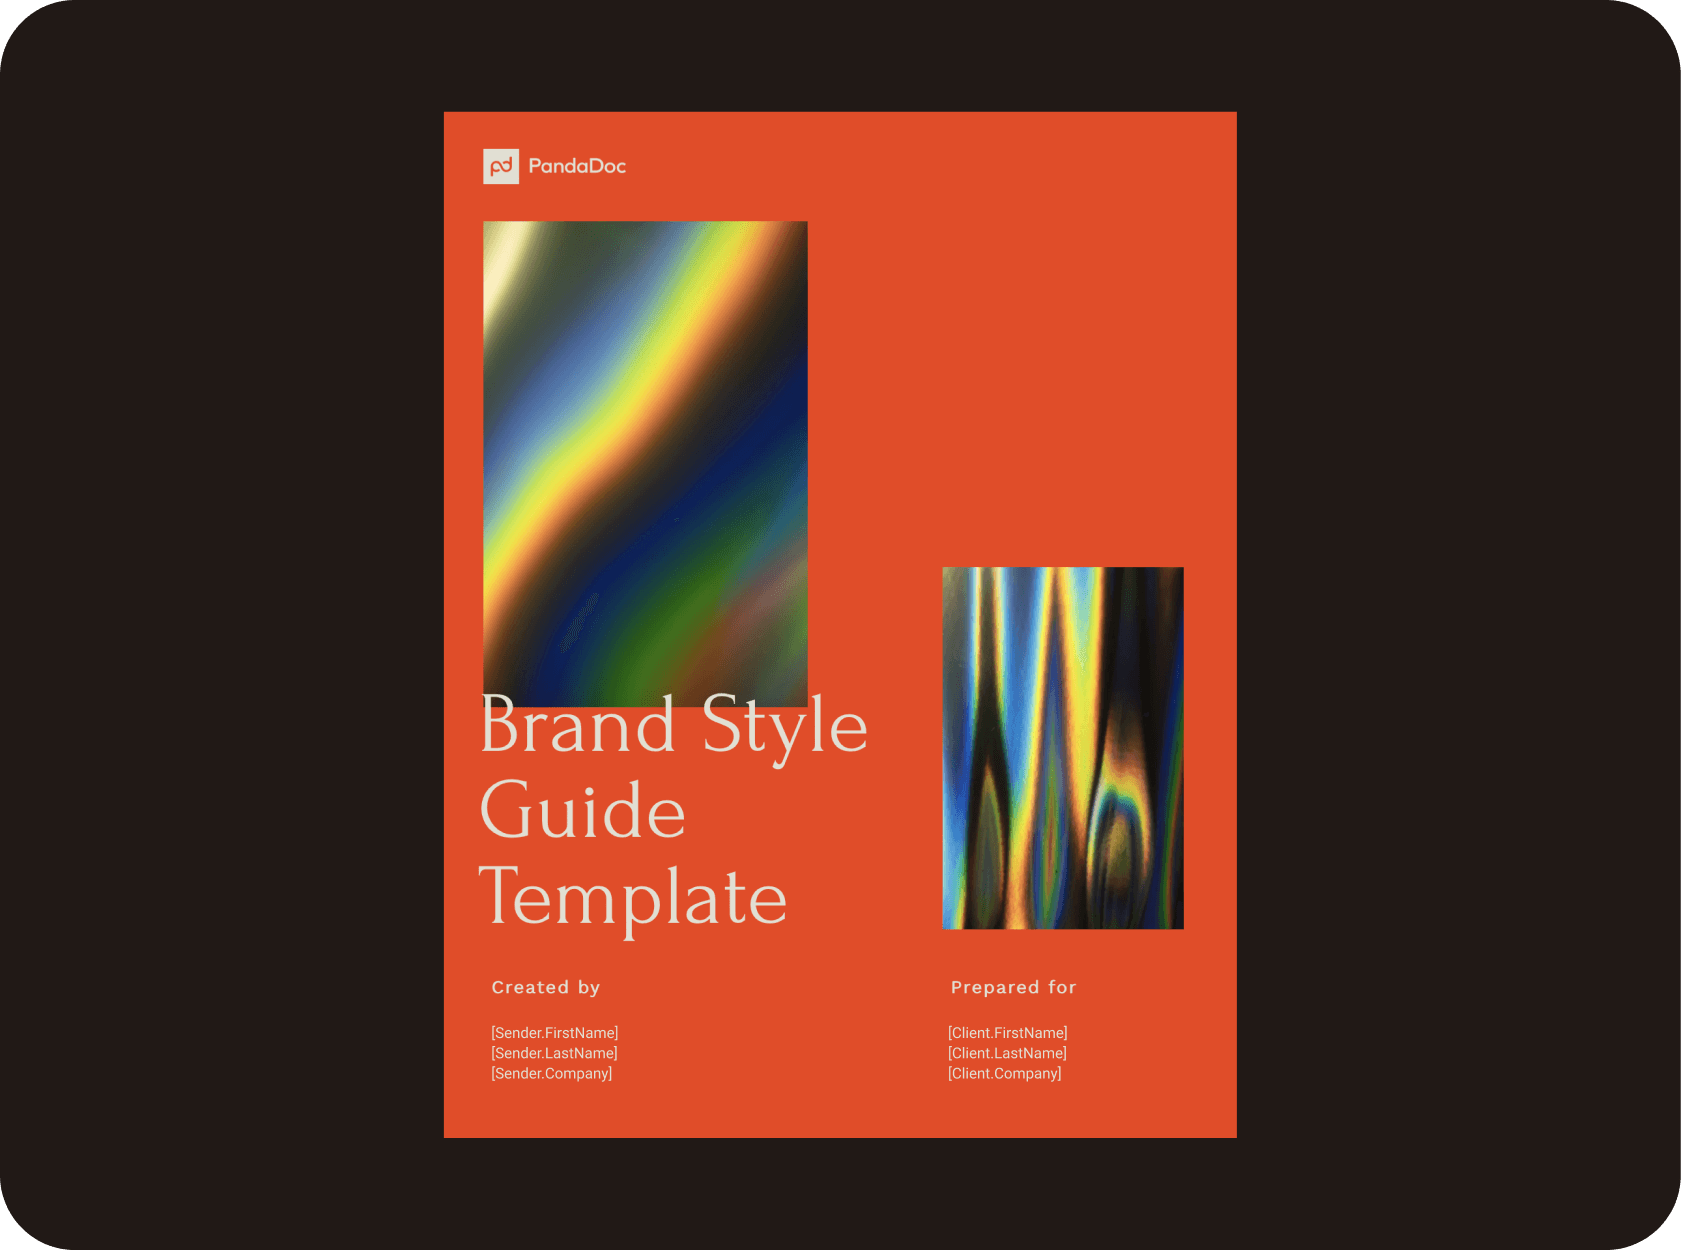 Brand Style Guide Template PandaDoc